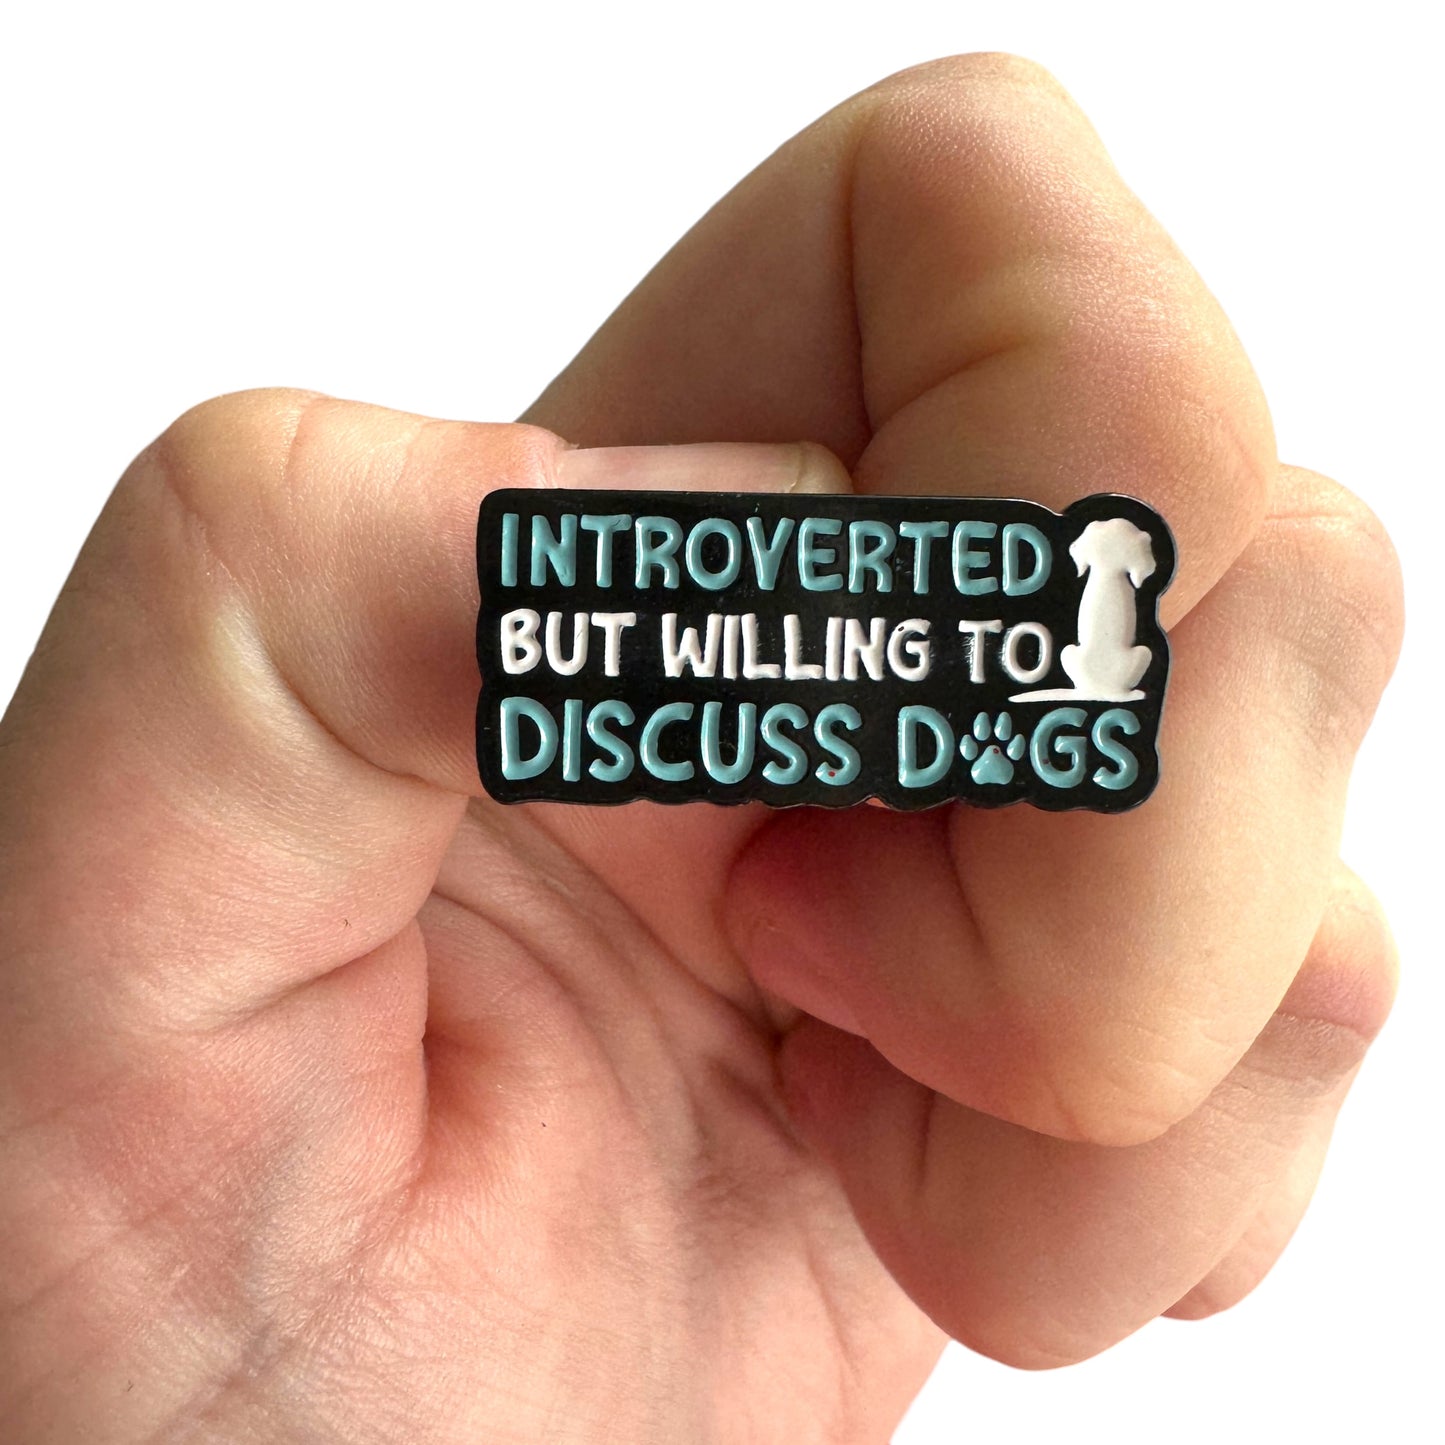 Pin — 'Introverted but willing to discuss dogs’